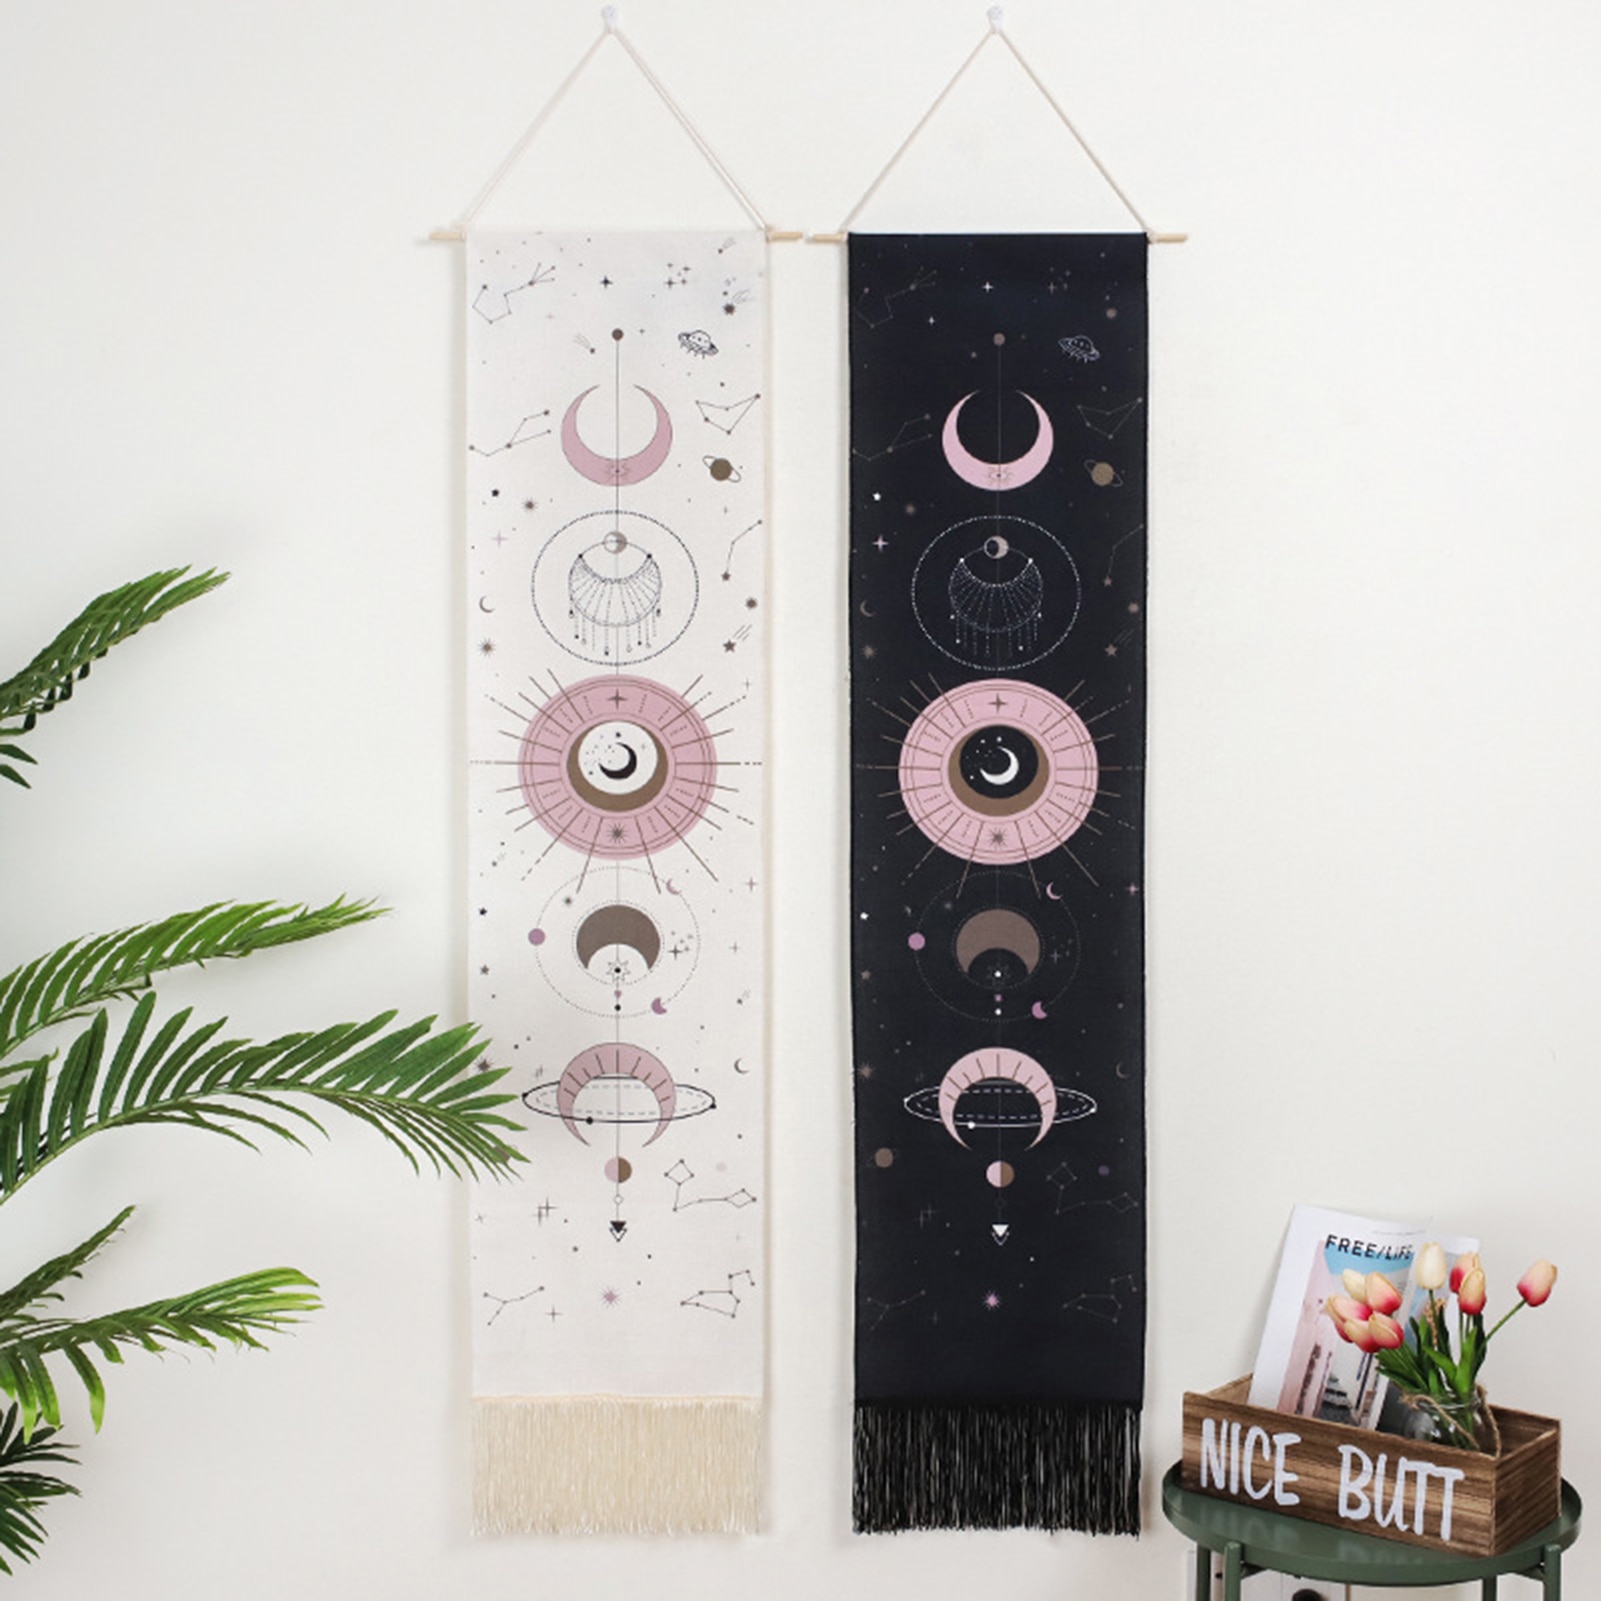 Moon Phase Tapestry Wall Hanging Tapestry Boho Art Tapestries Bright Printing Pattern hand-made lace hanging wall decoration